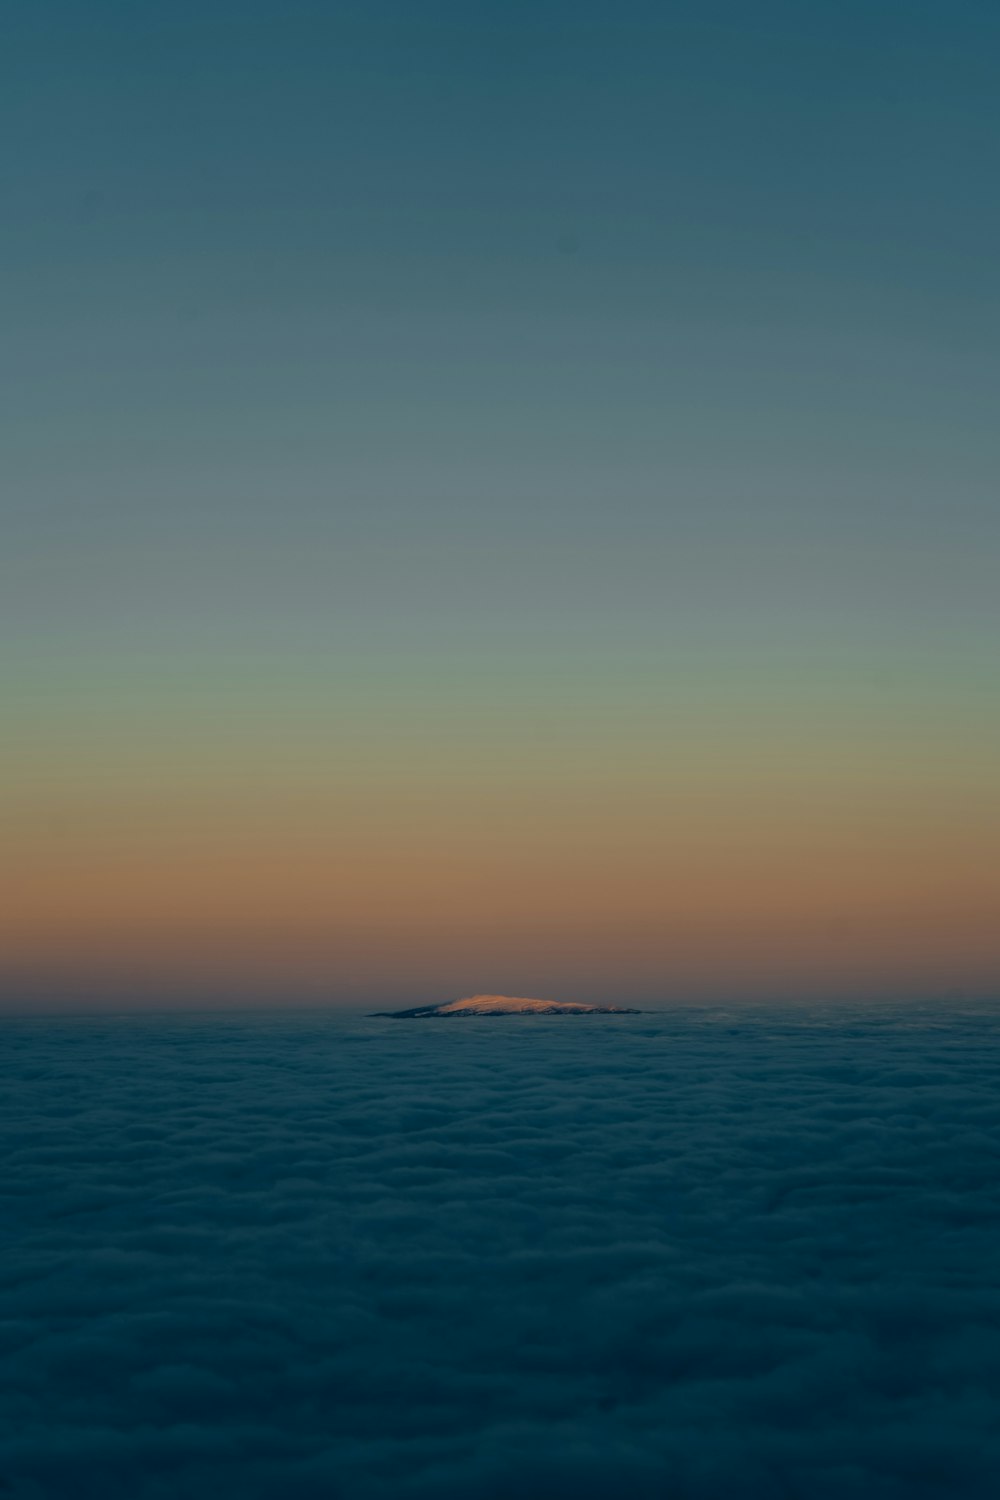 a small island in the middle of a sea of clouds